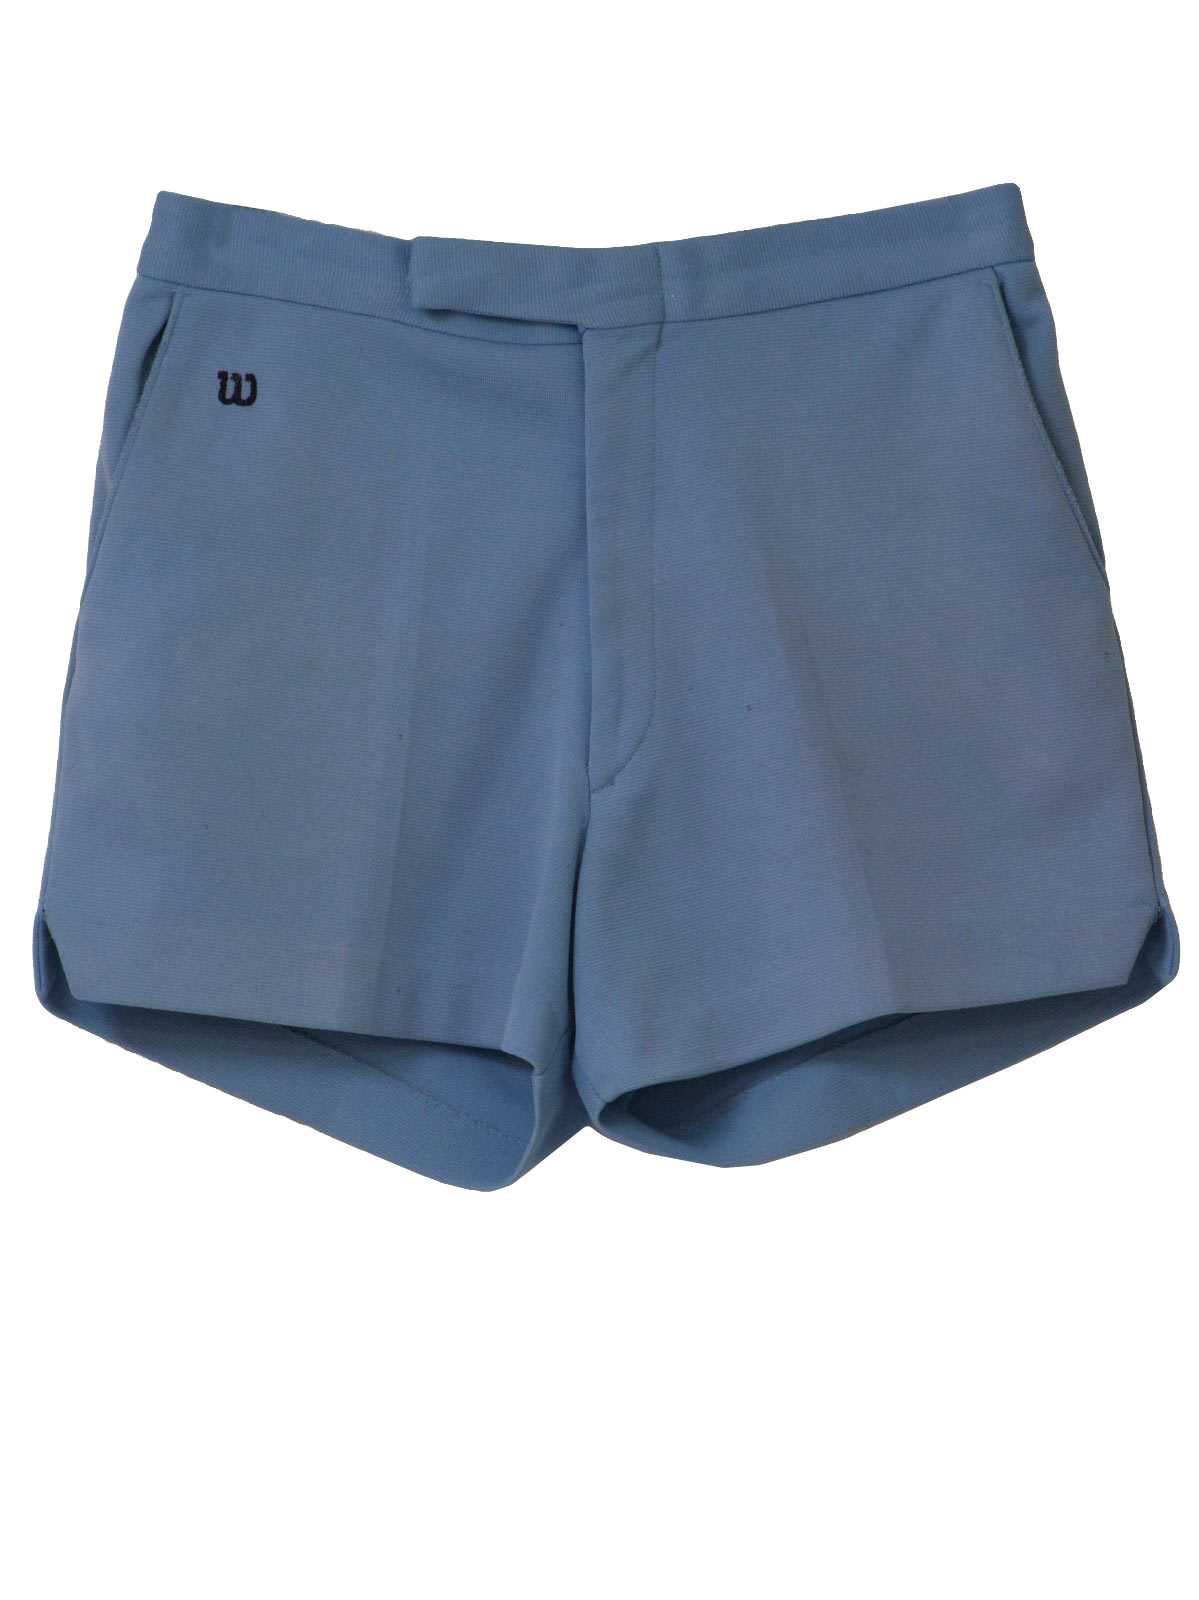 1970s Tennis Apparel by Wilson Shorts: 70s -Tennis Apparel by Wilson ...